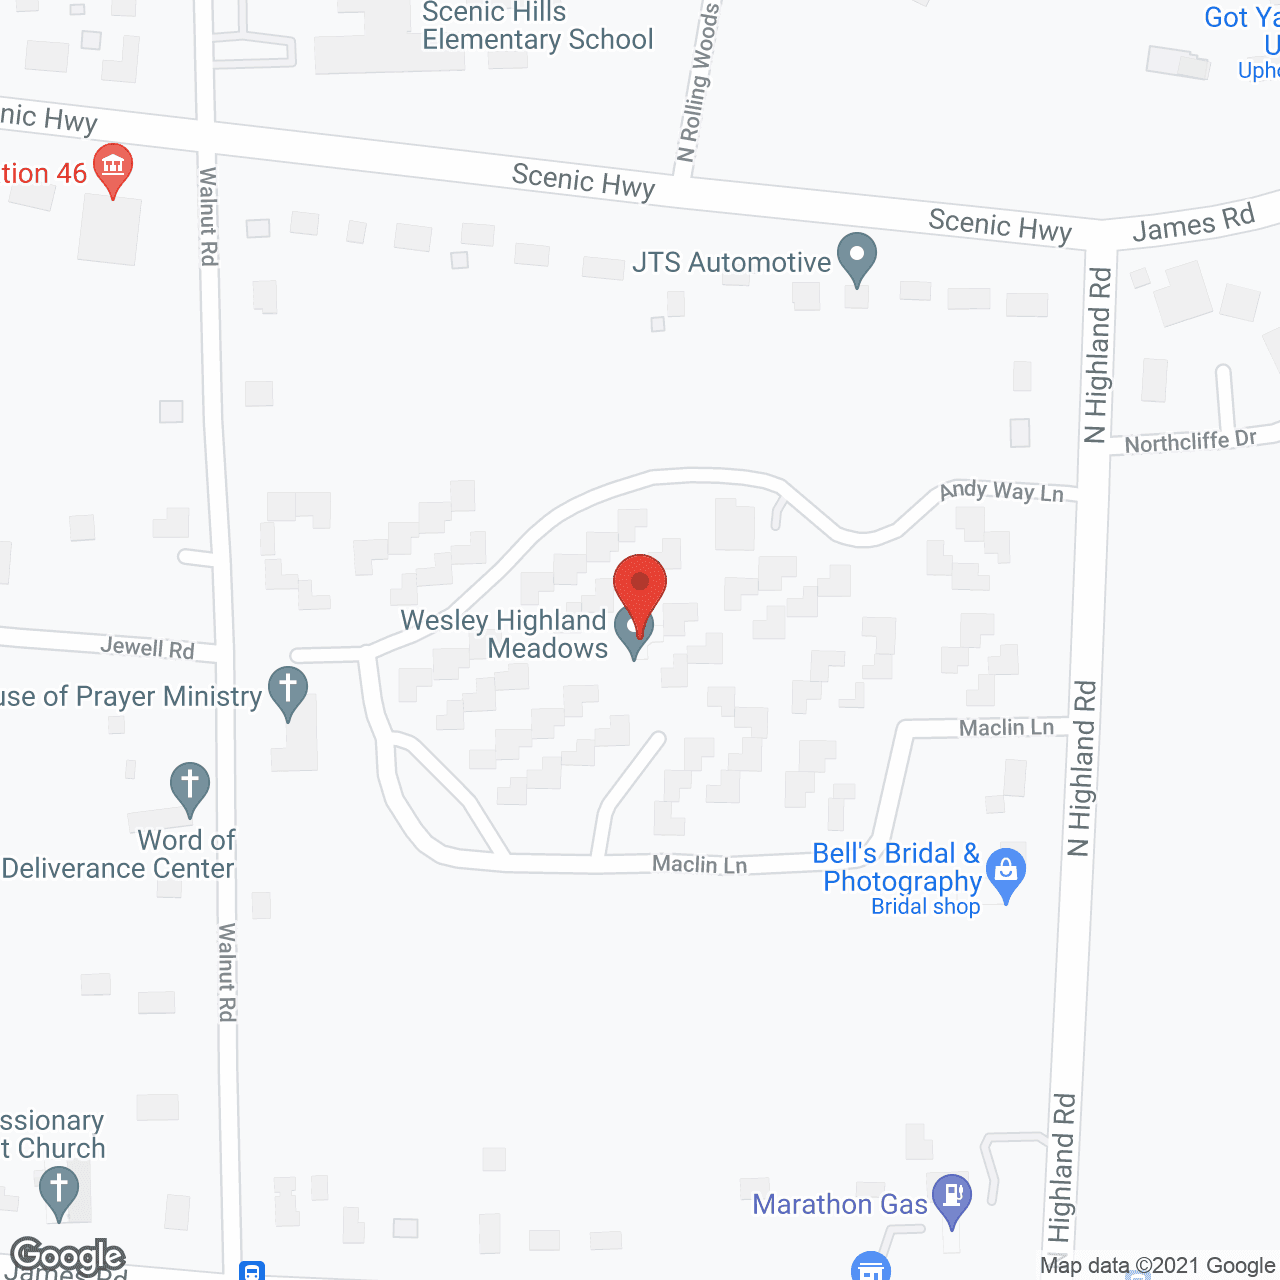 Wesley Highland Meadows in google map